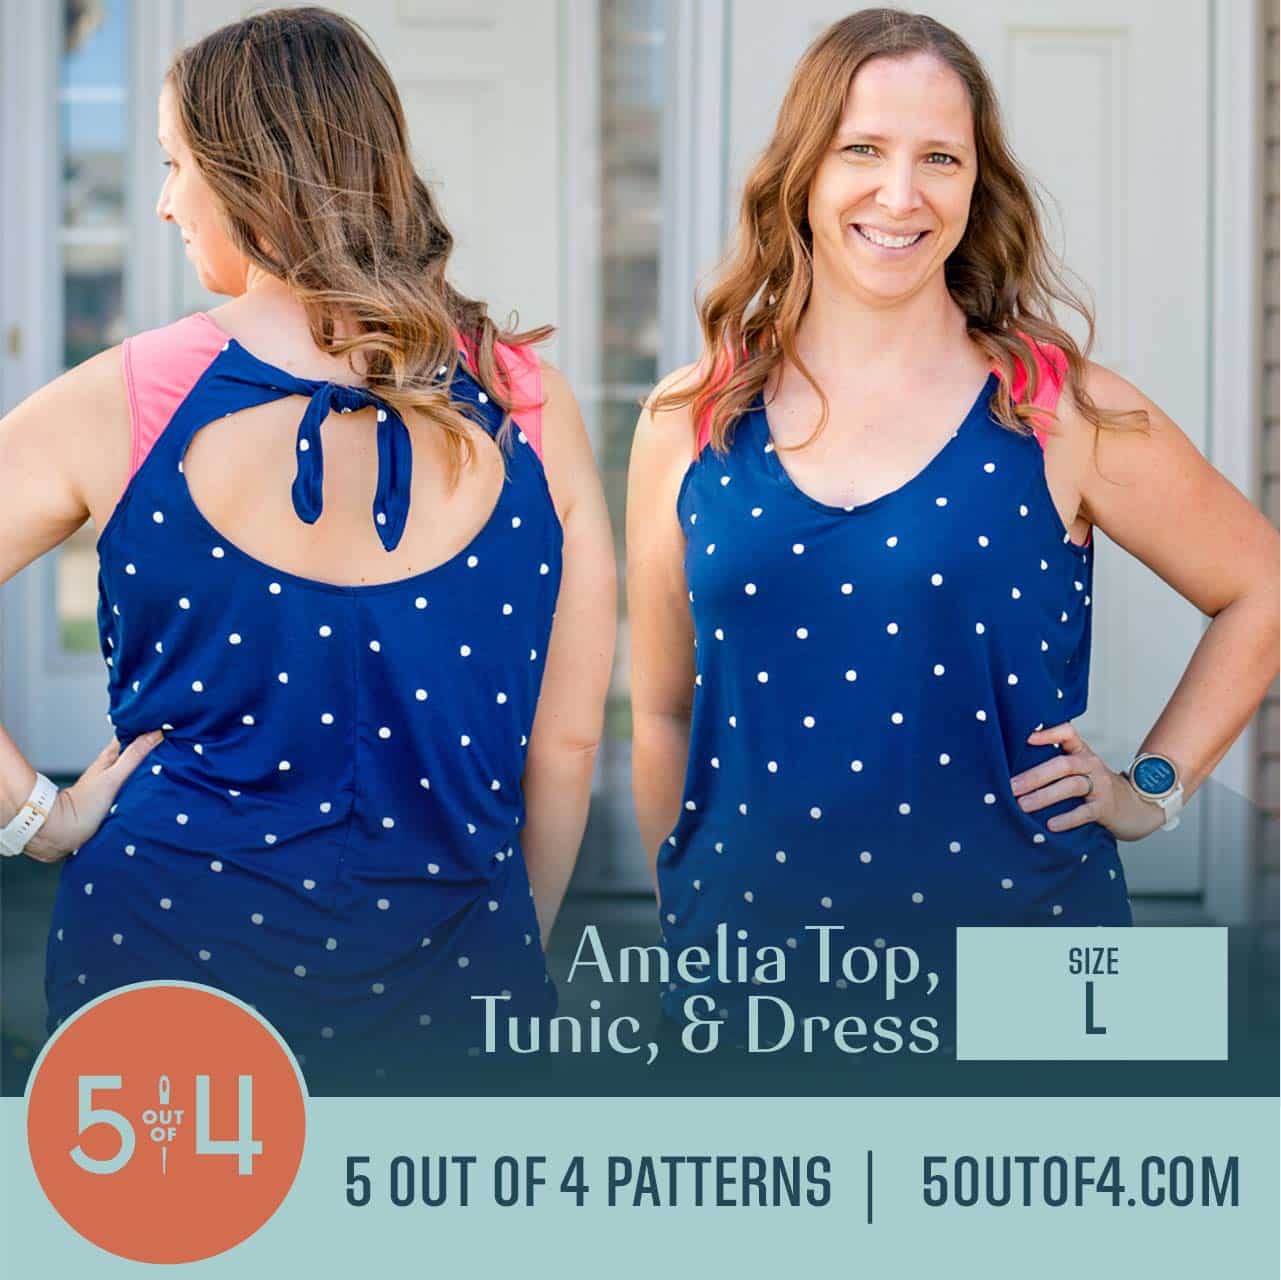 Amelia Top, Tunic, and Dress - 5 out of 4 Patterns